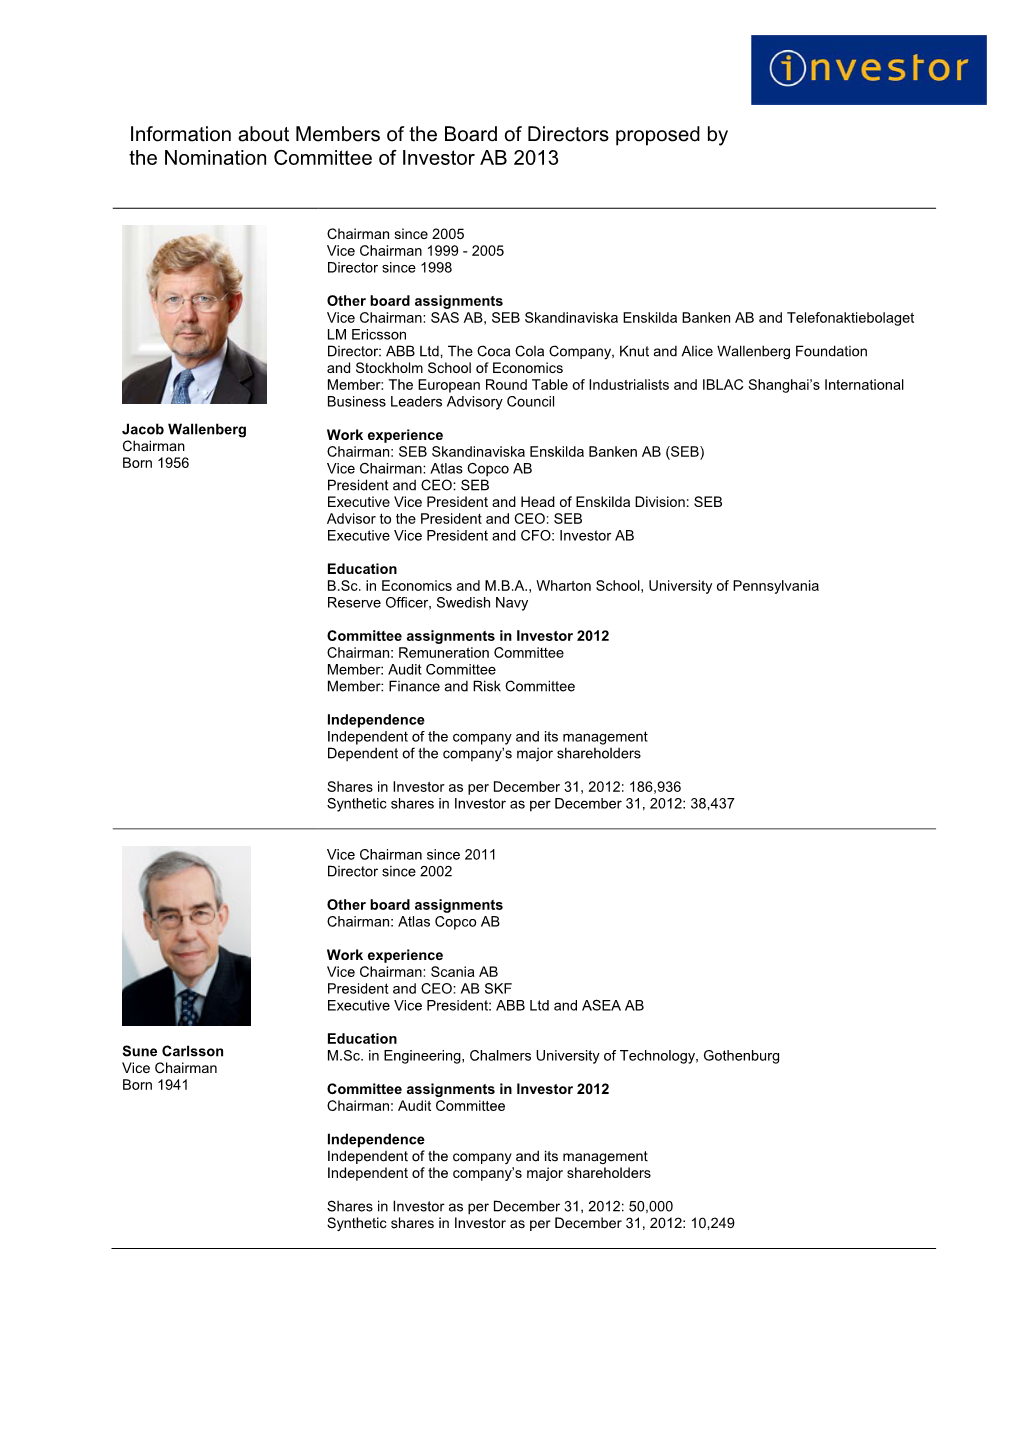 Information About Members of the Board of Directors Proposed by the Nomination Committee of Investor AB 2013